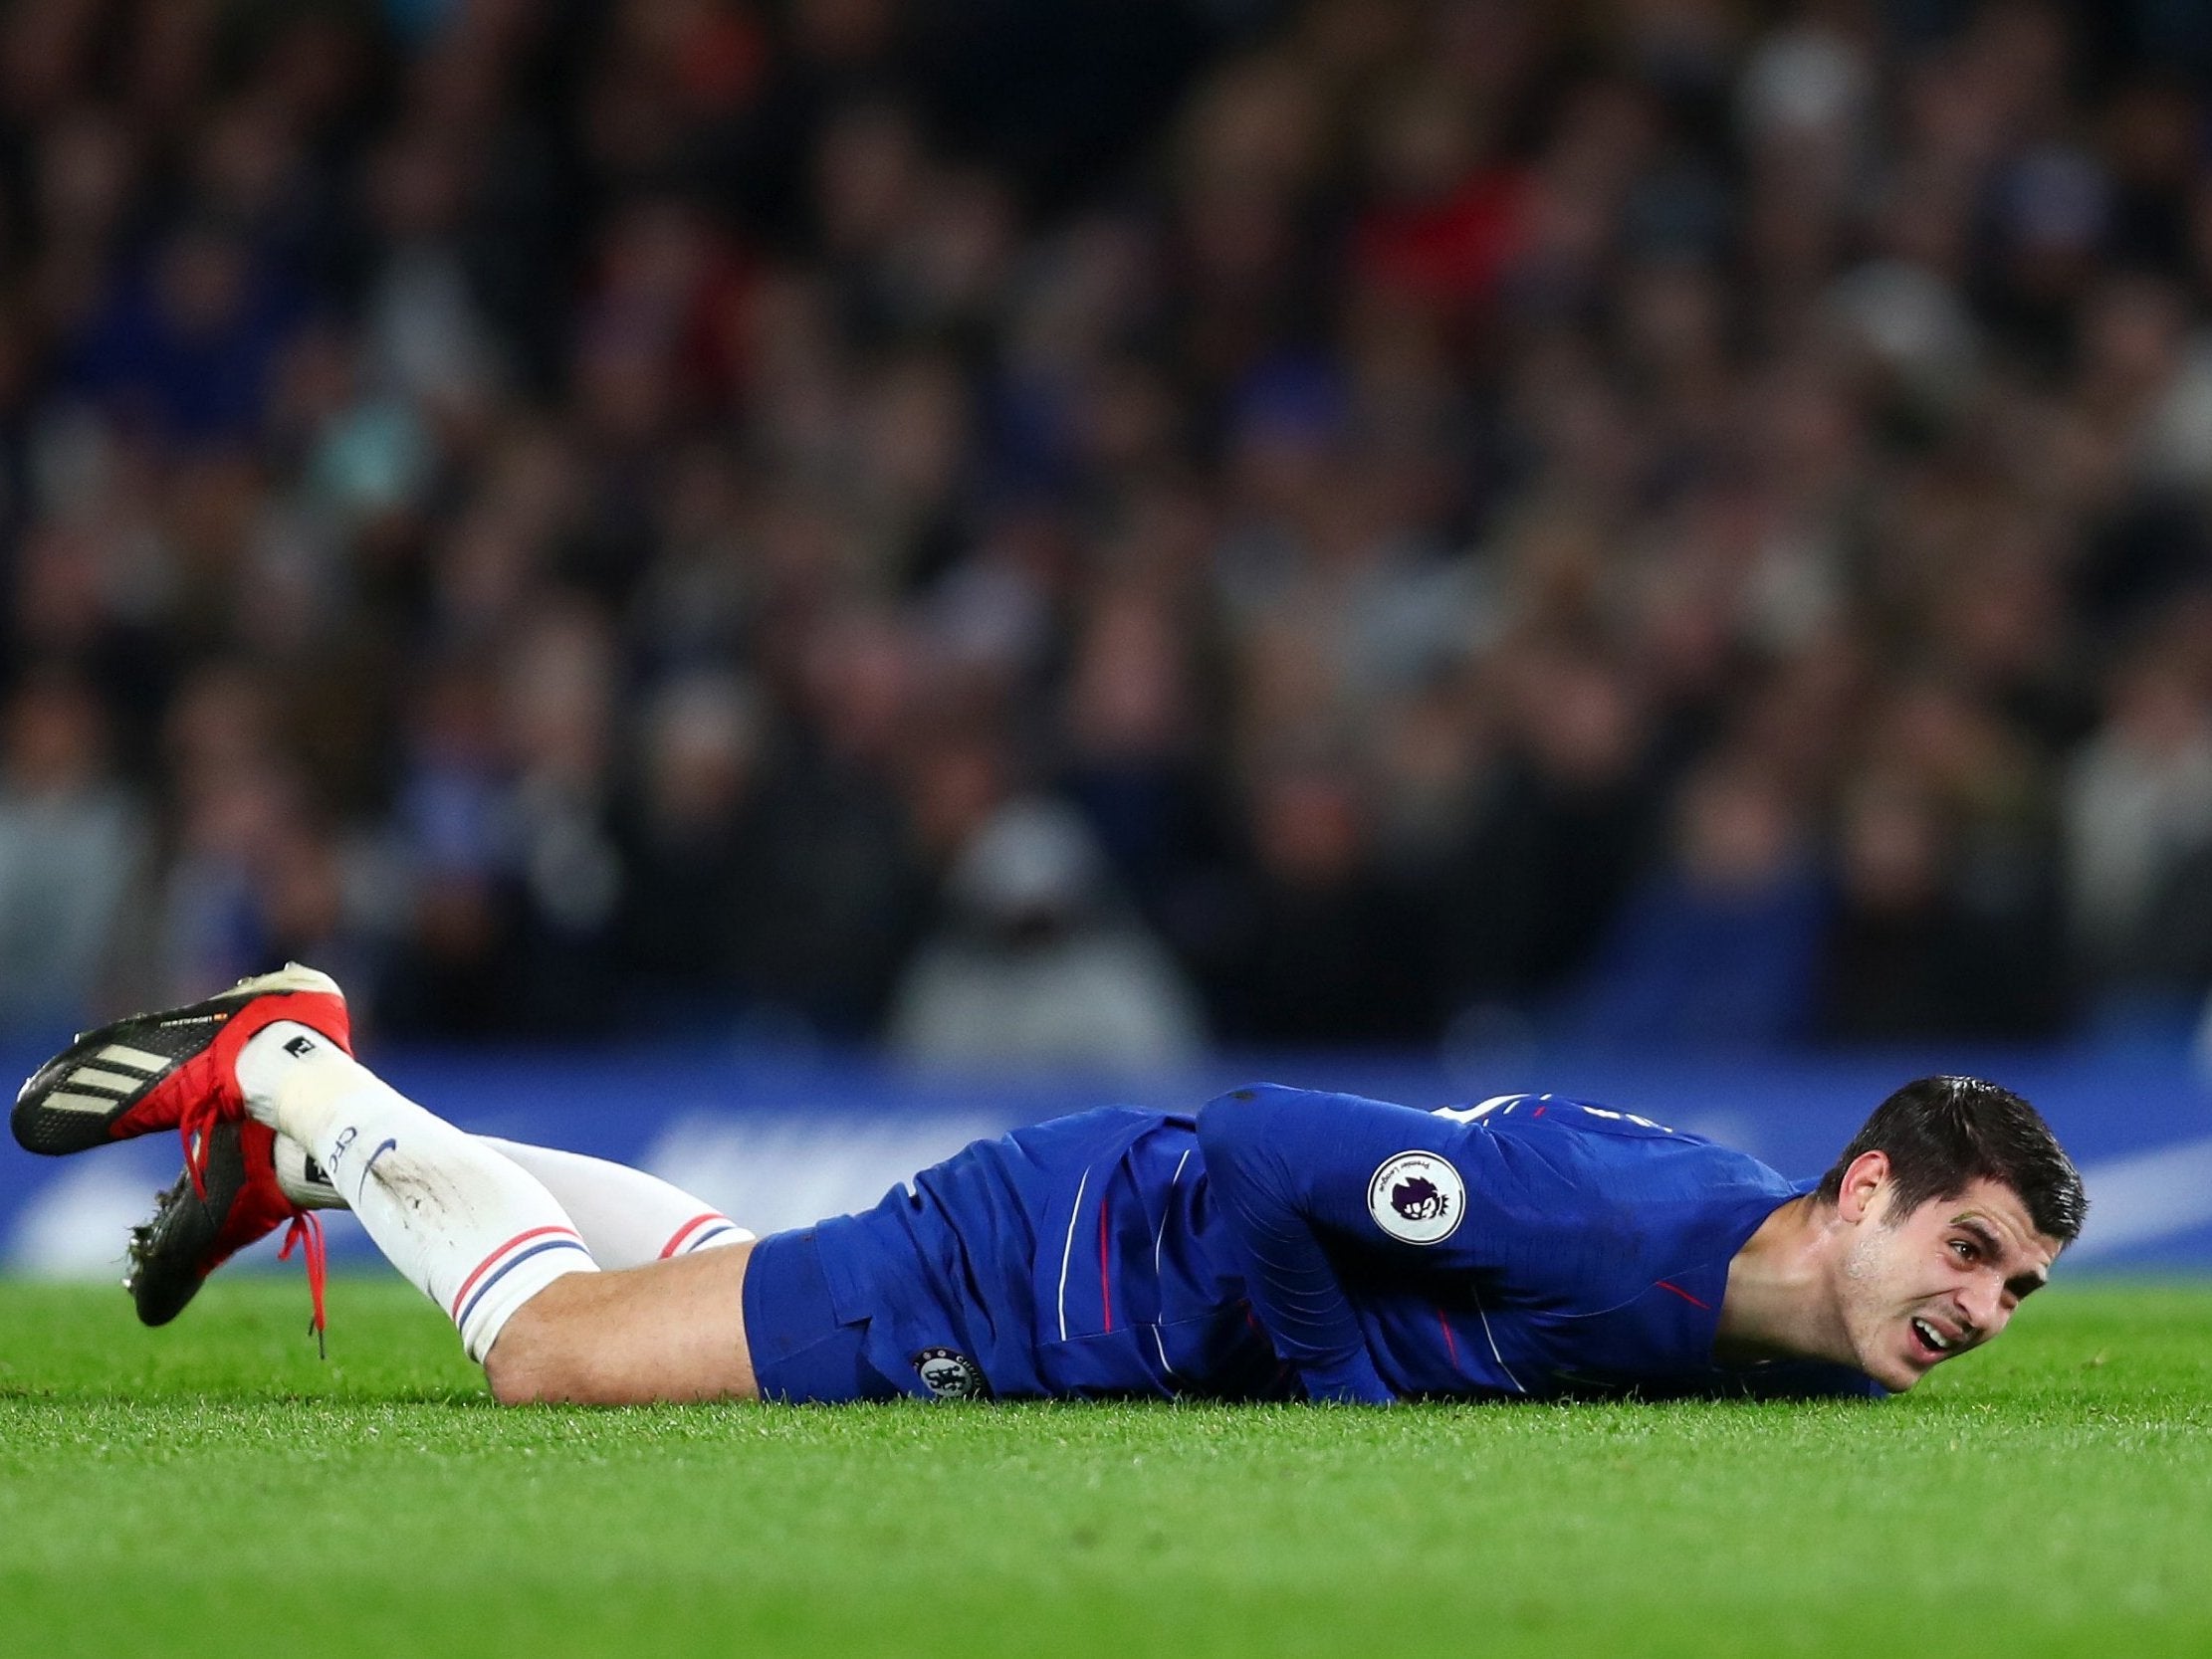 A summary of Morata's time at Chelsea